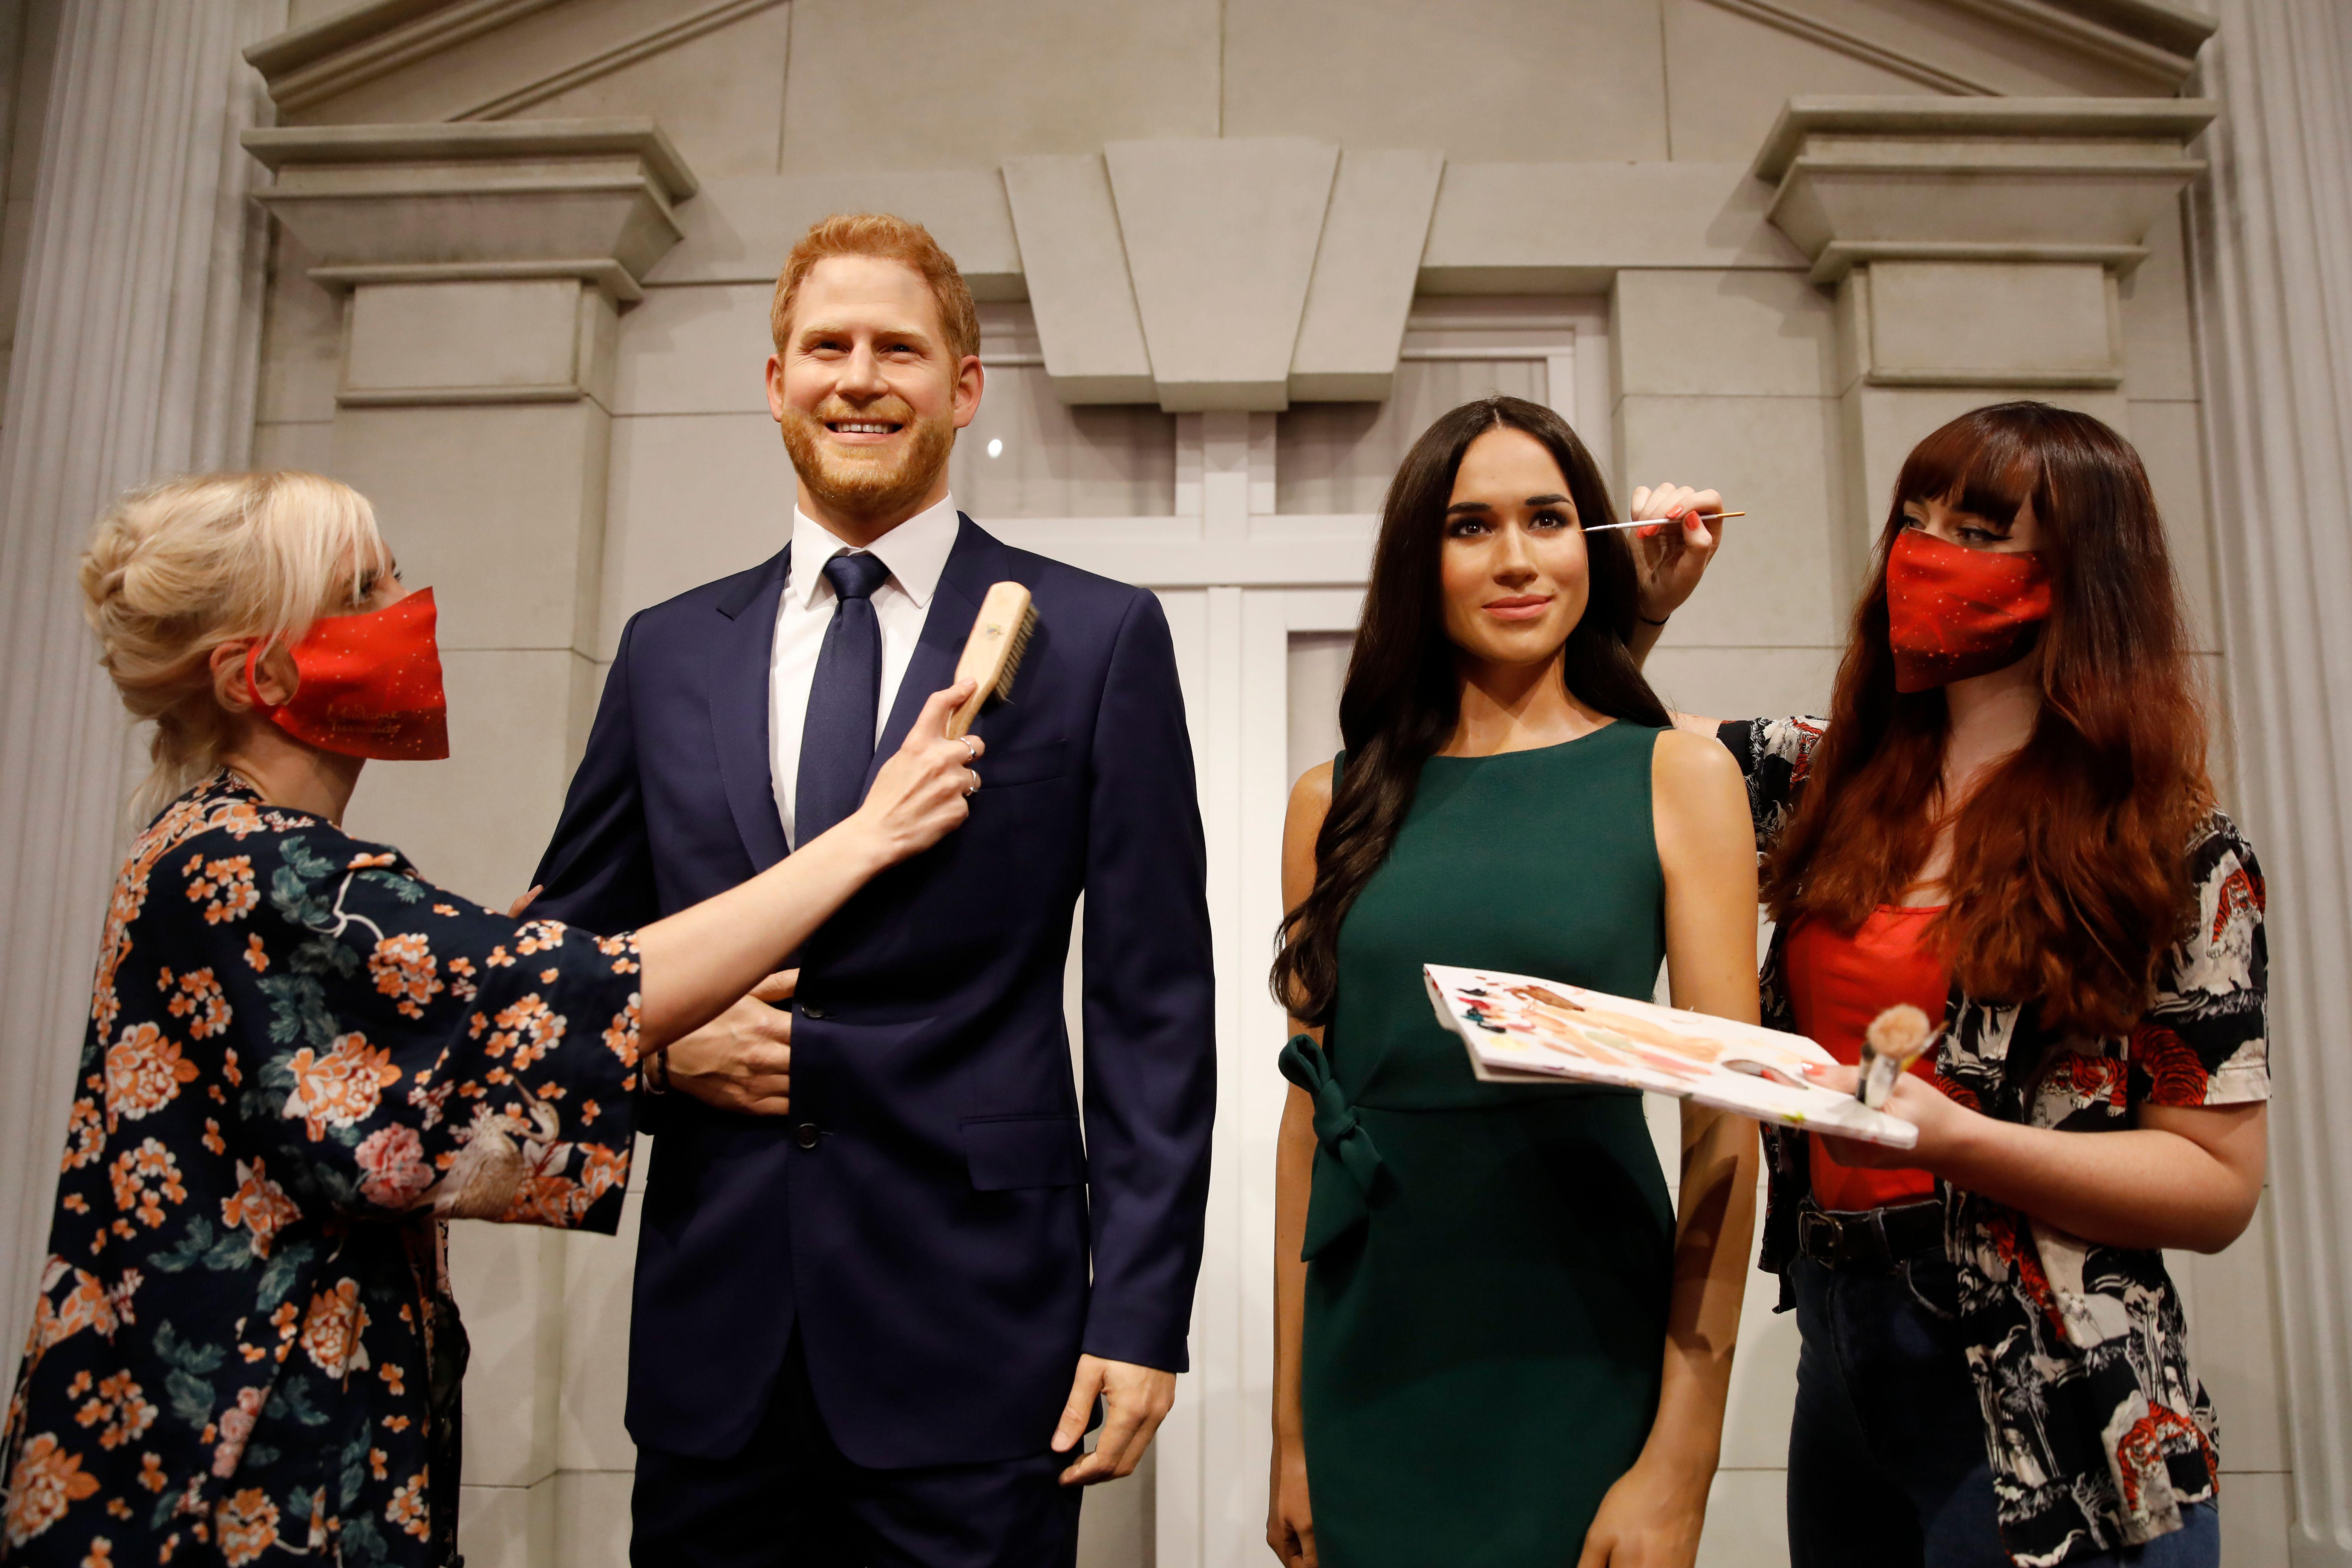 Artists put the finishing touches to wax figures of Britain's Prince Harry, Duke of Sussex and Britain's Meghan, Duchess of Sussex as Madame Tussauds prepares to reopen its doors to the public on July 30, 2020 following the easing of coronavirus lockdown restrictions in England. (Photo by Tolga AKMEN / AFP) (Photo by TOLGA AKMEN/AFP via Getty Images)